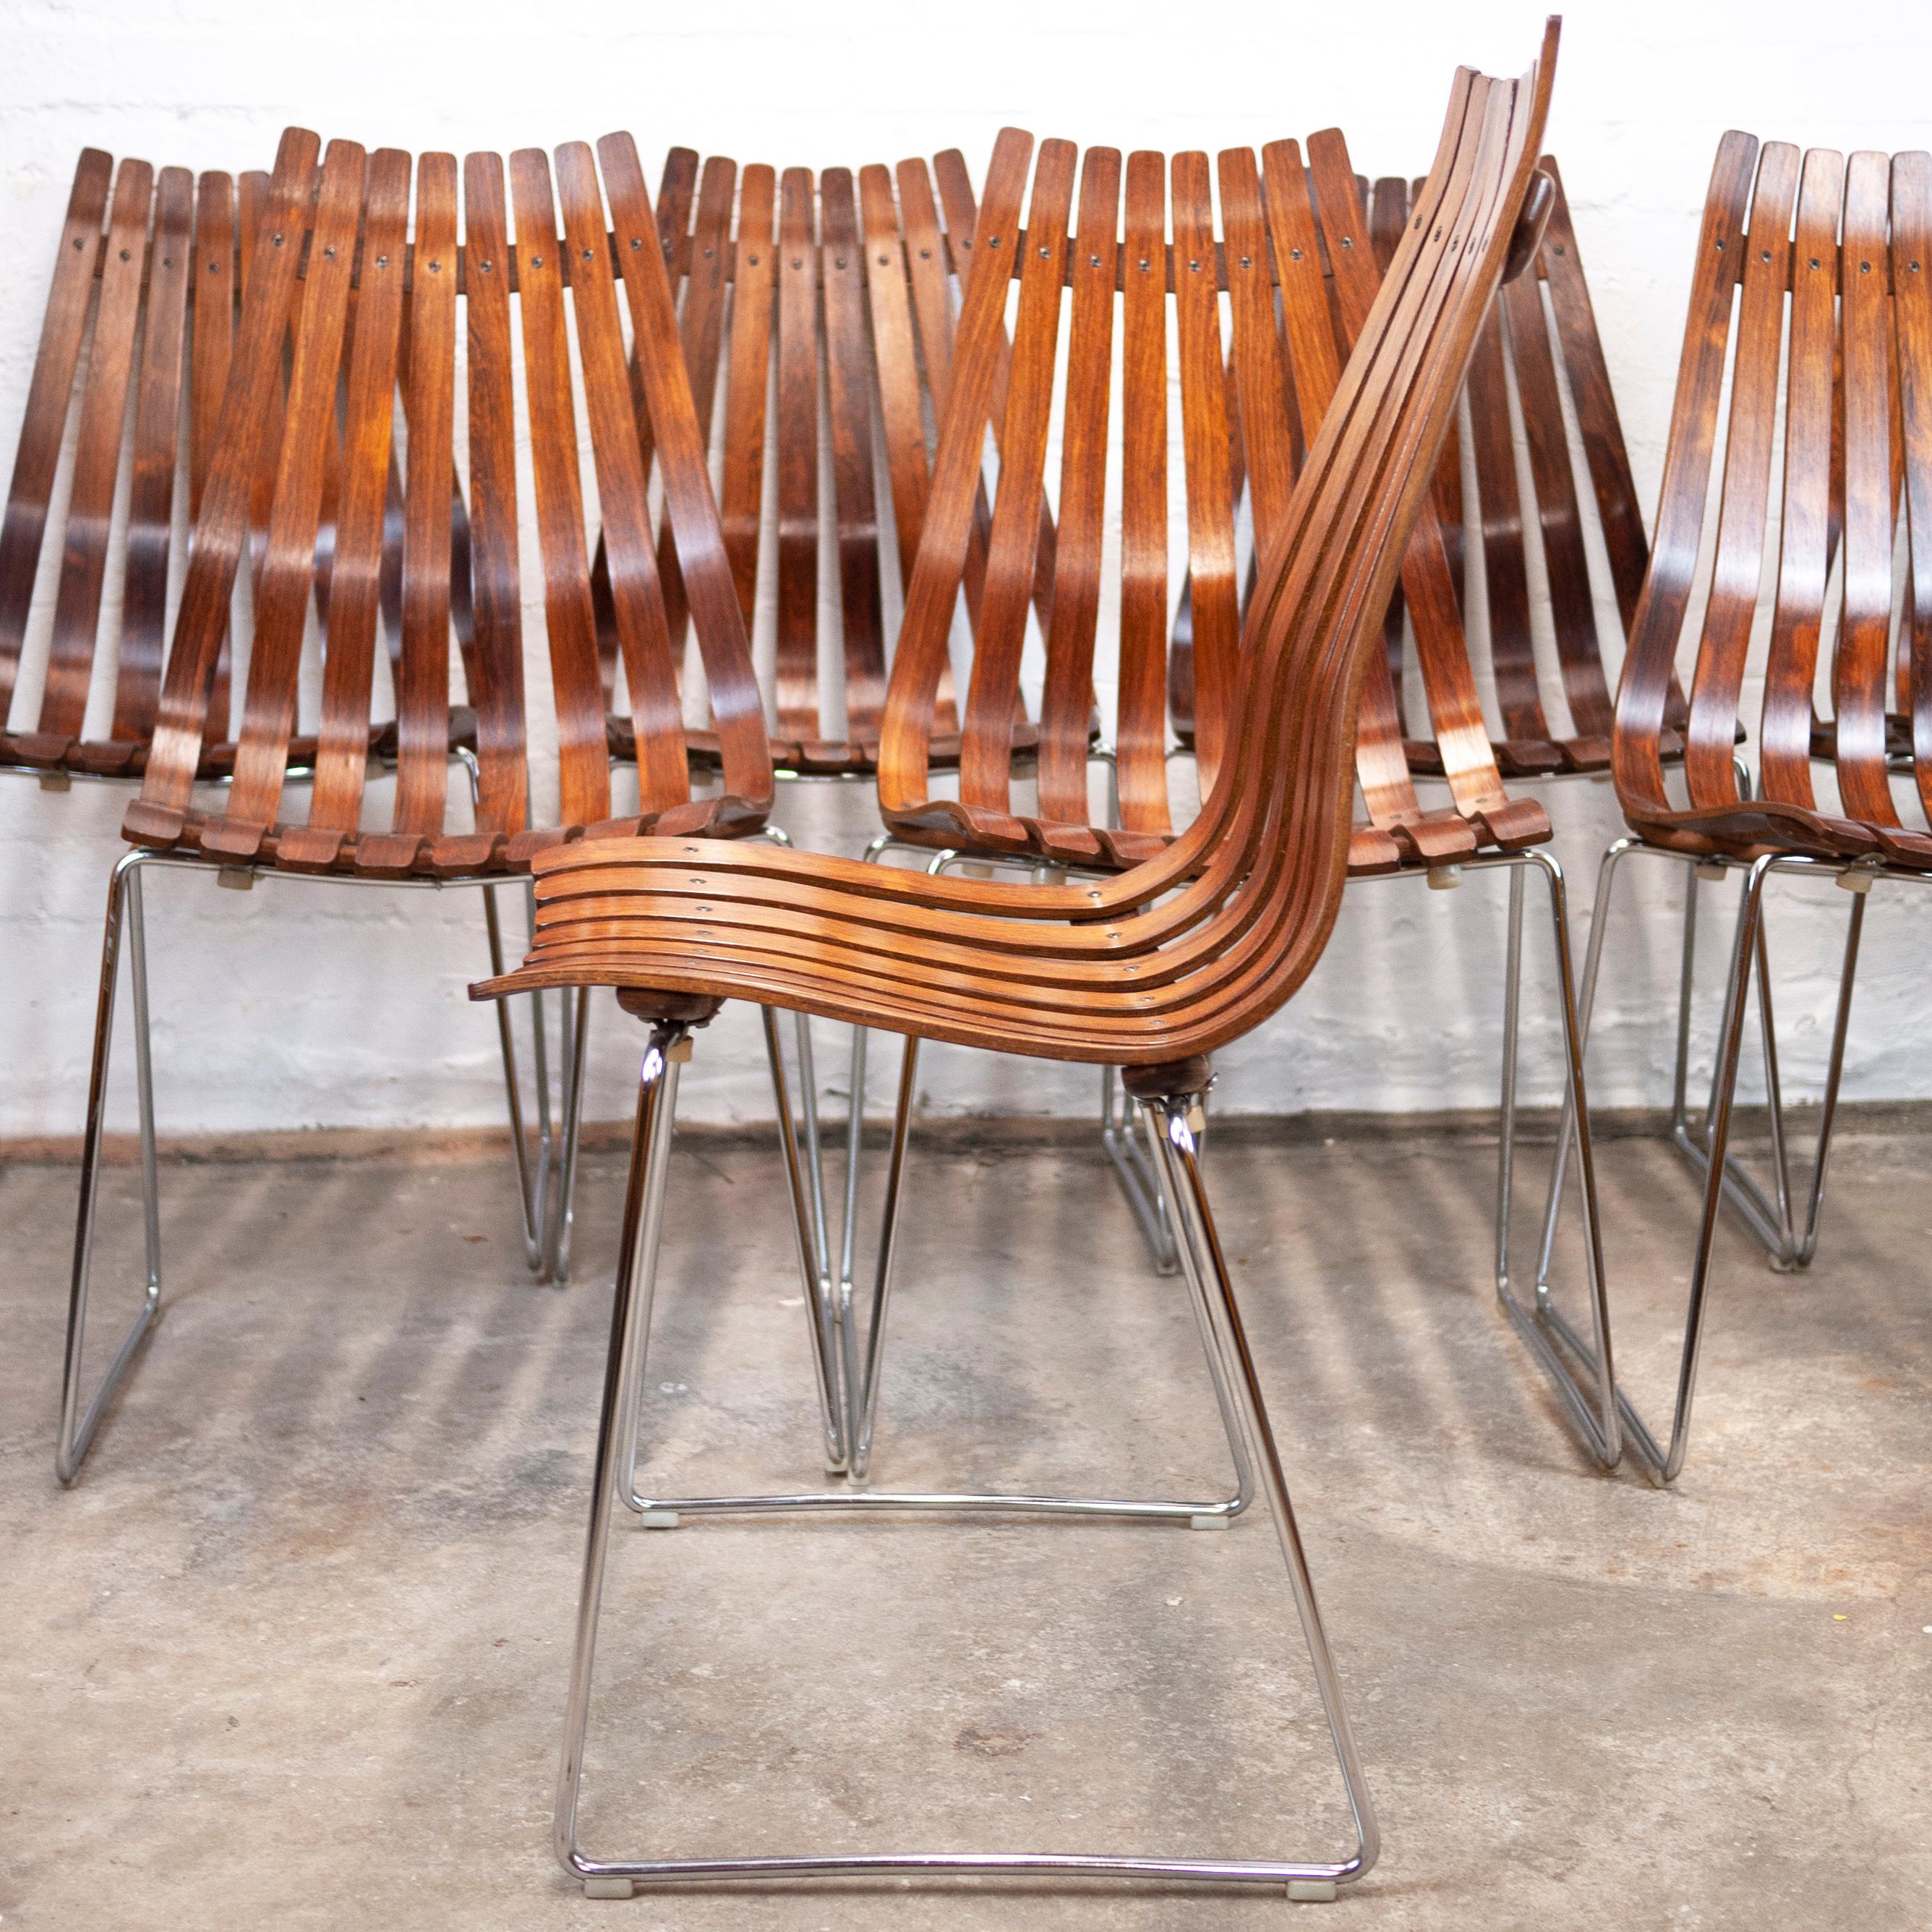 Mid-20th Century Rosewood Dining Chairs by Hans Brattrud for Hove Møbler, 1960s, Set of 8